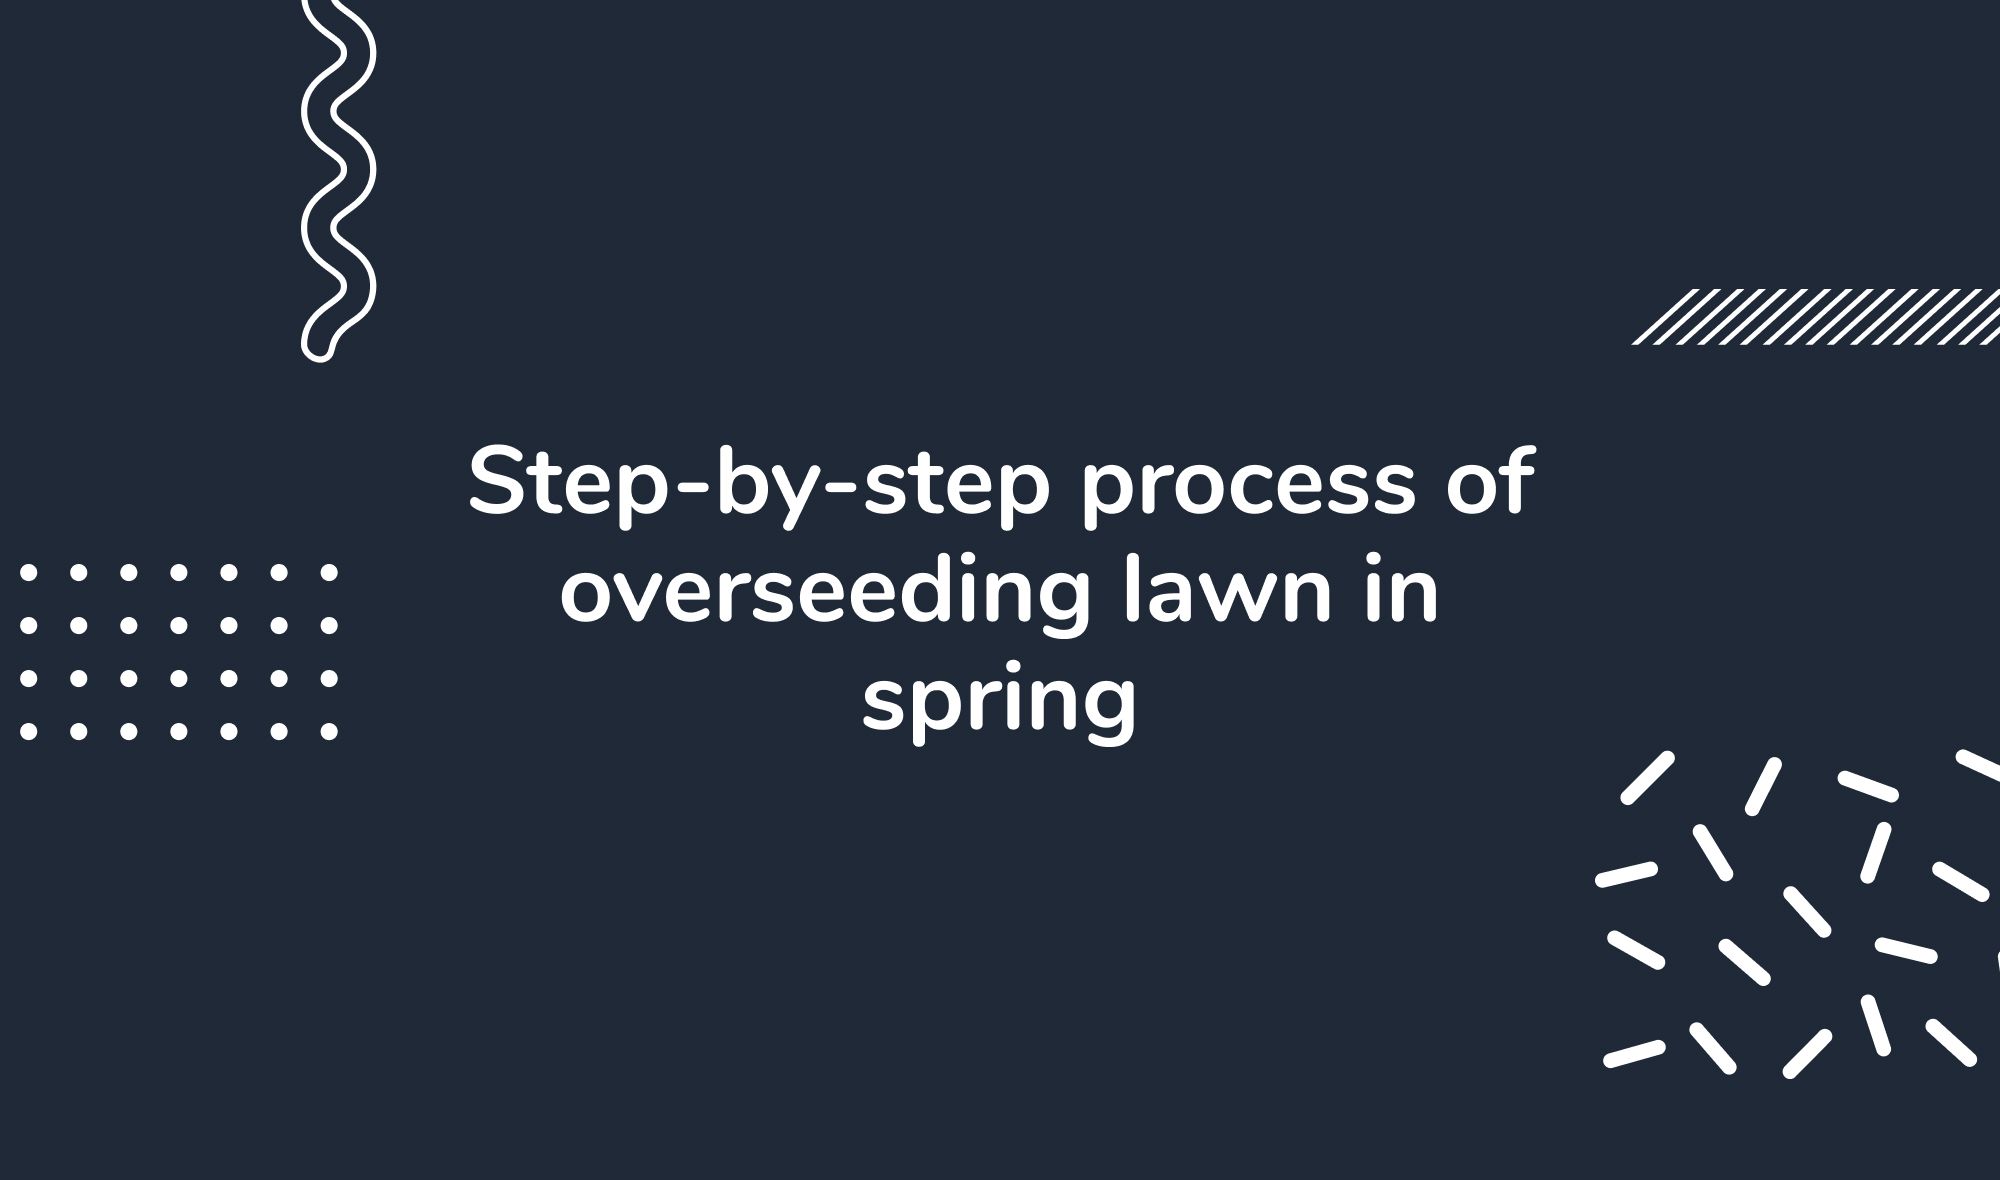 Step-by-step process of overseeding lawn in spring